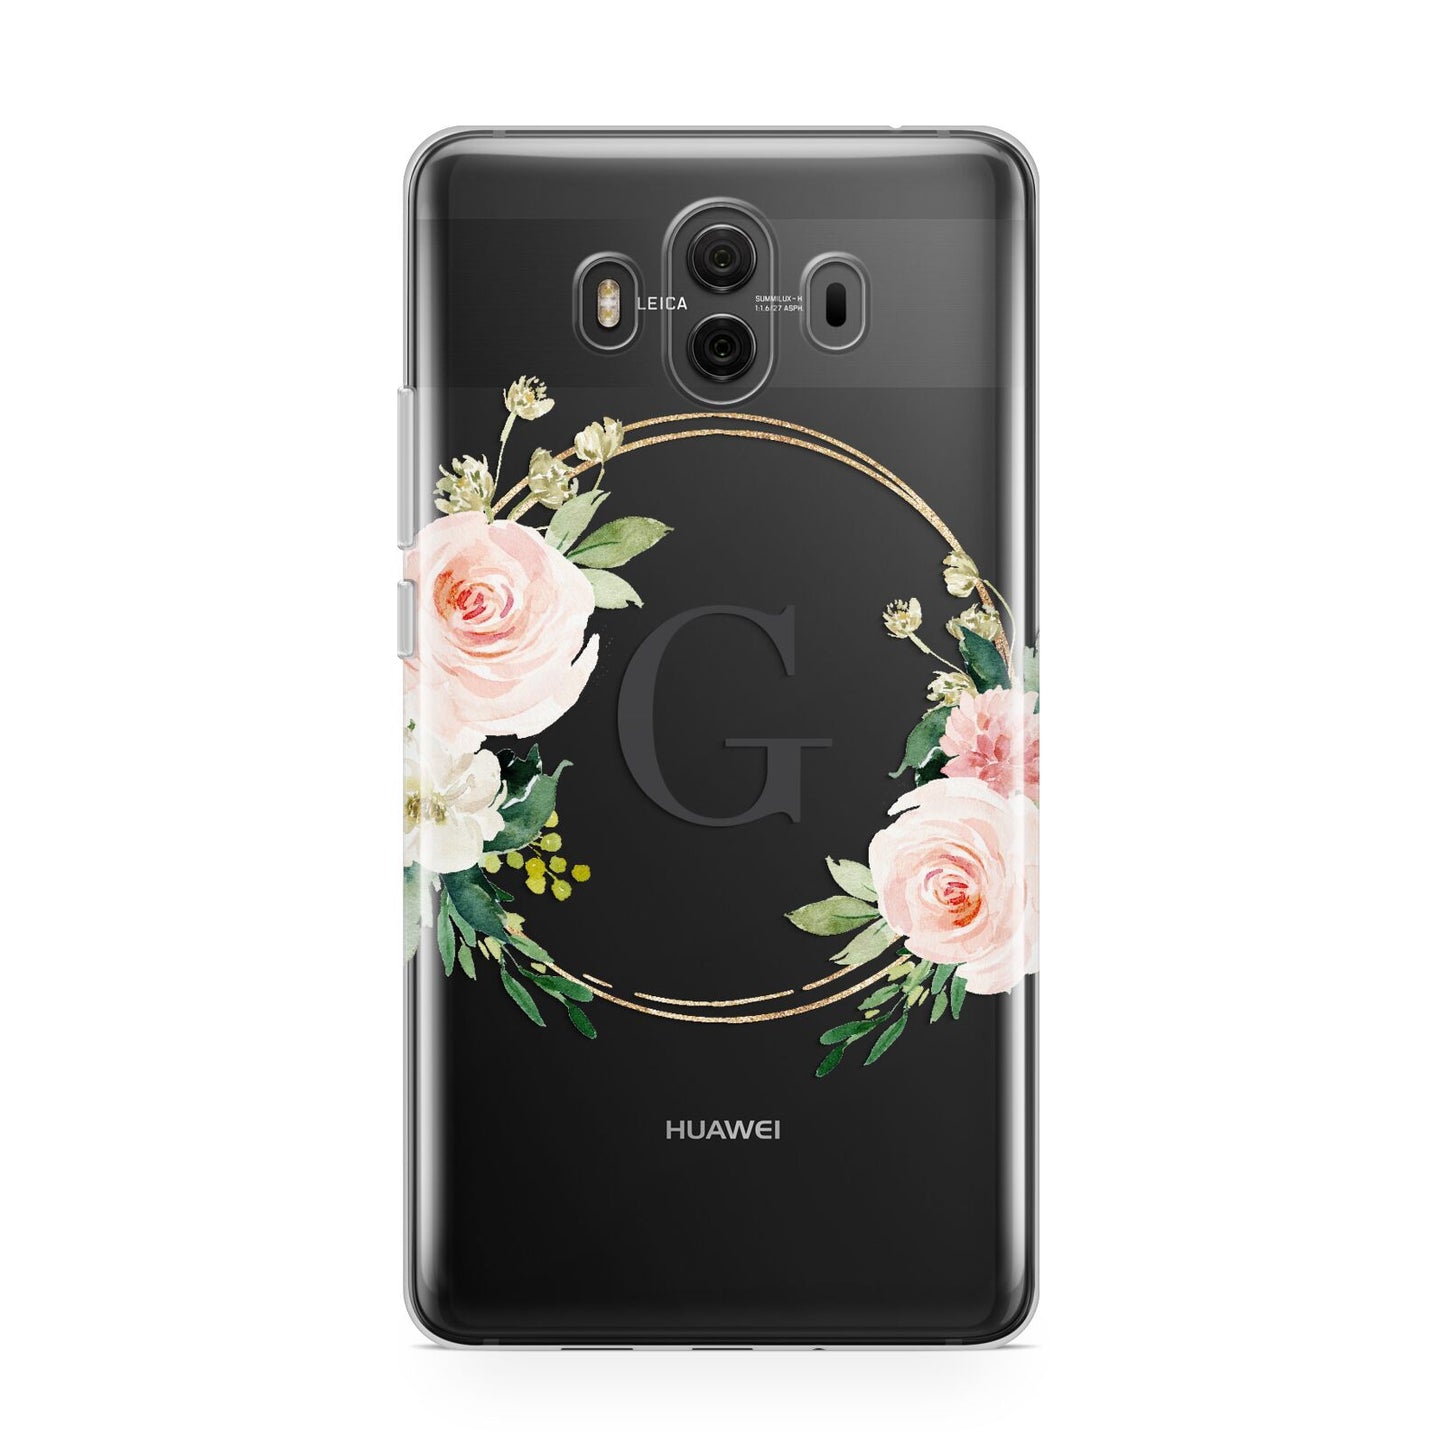 Personalised Blush Floral Wreath Huawei Mate 10 Protective Phone Case